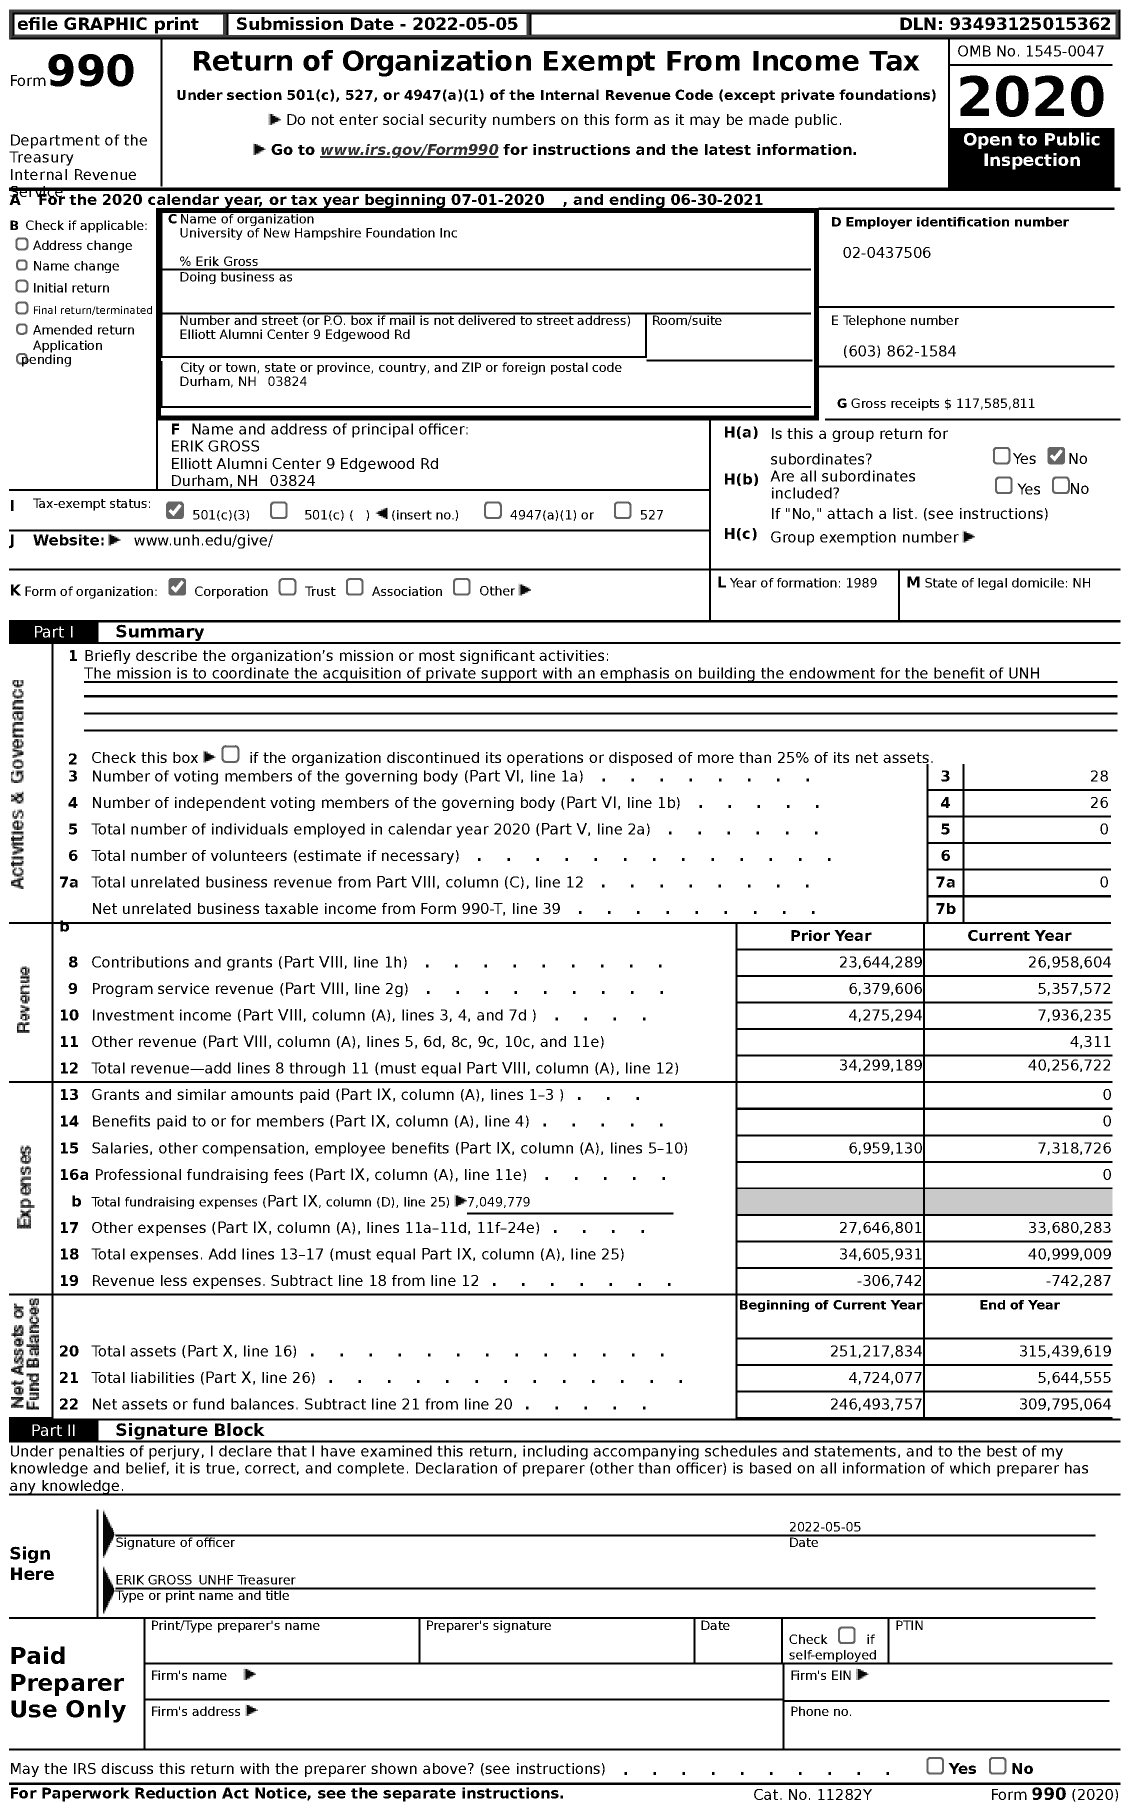 Image of first page of 2020 Form 990 for University of New Hampshire Foundation (UNH)